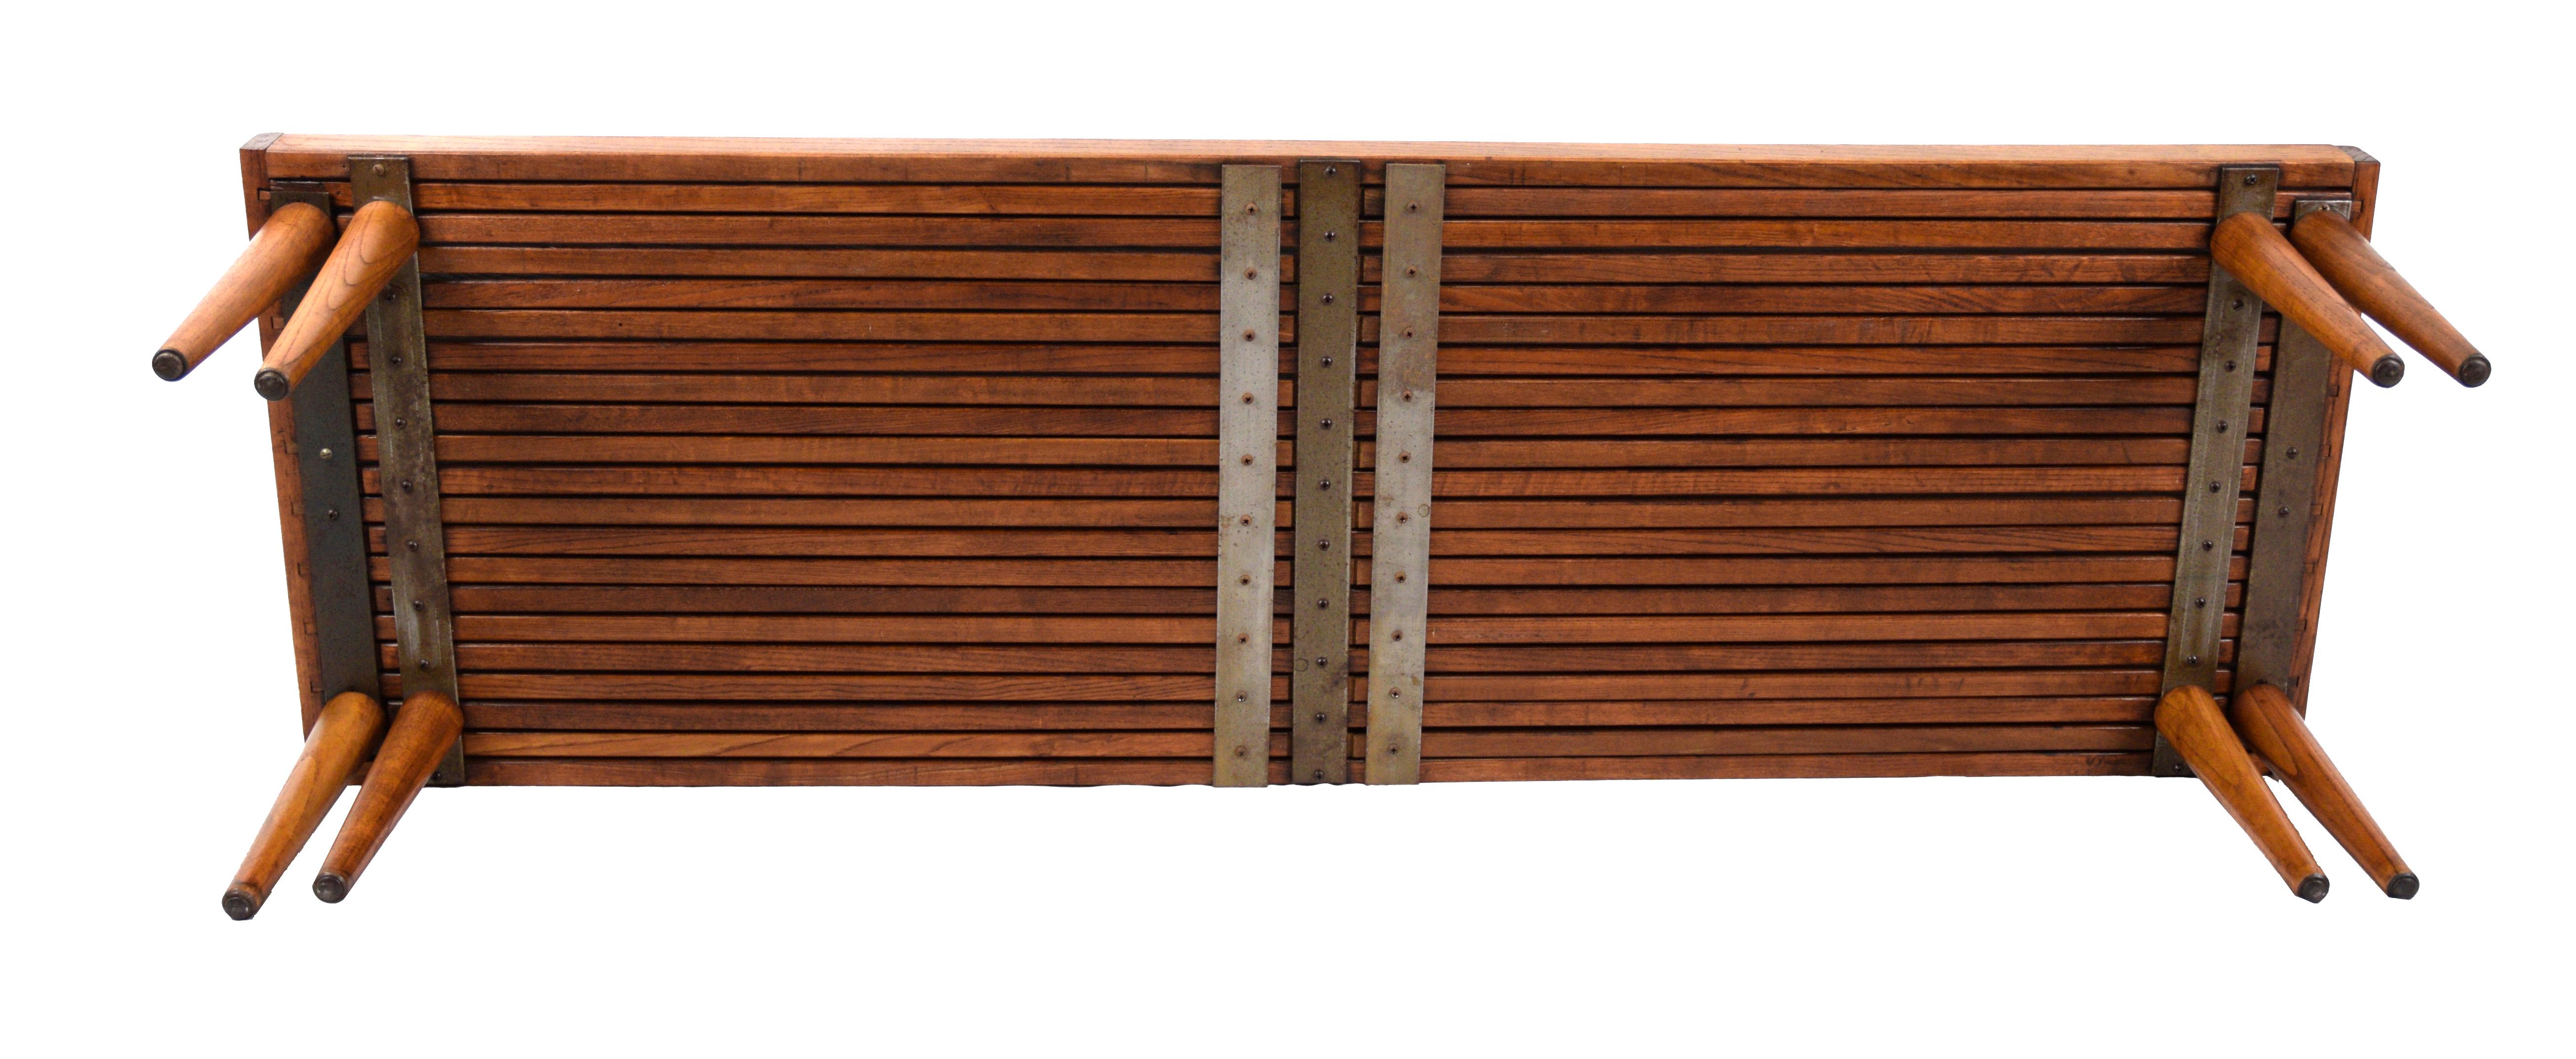 American Mid Century Modern Expandable Slatted Coffee Table/Bench by John Keal